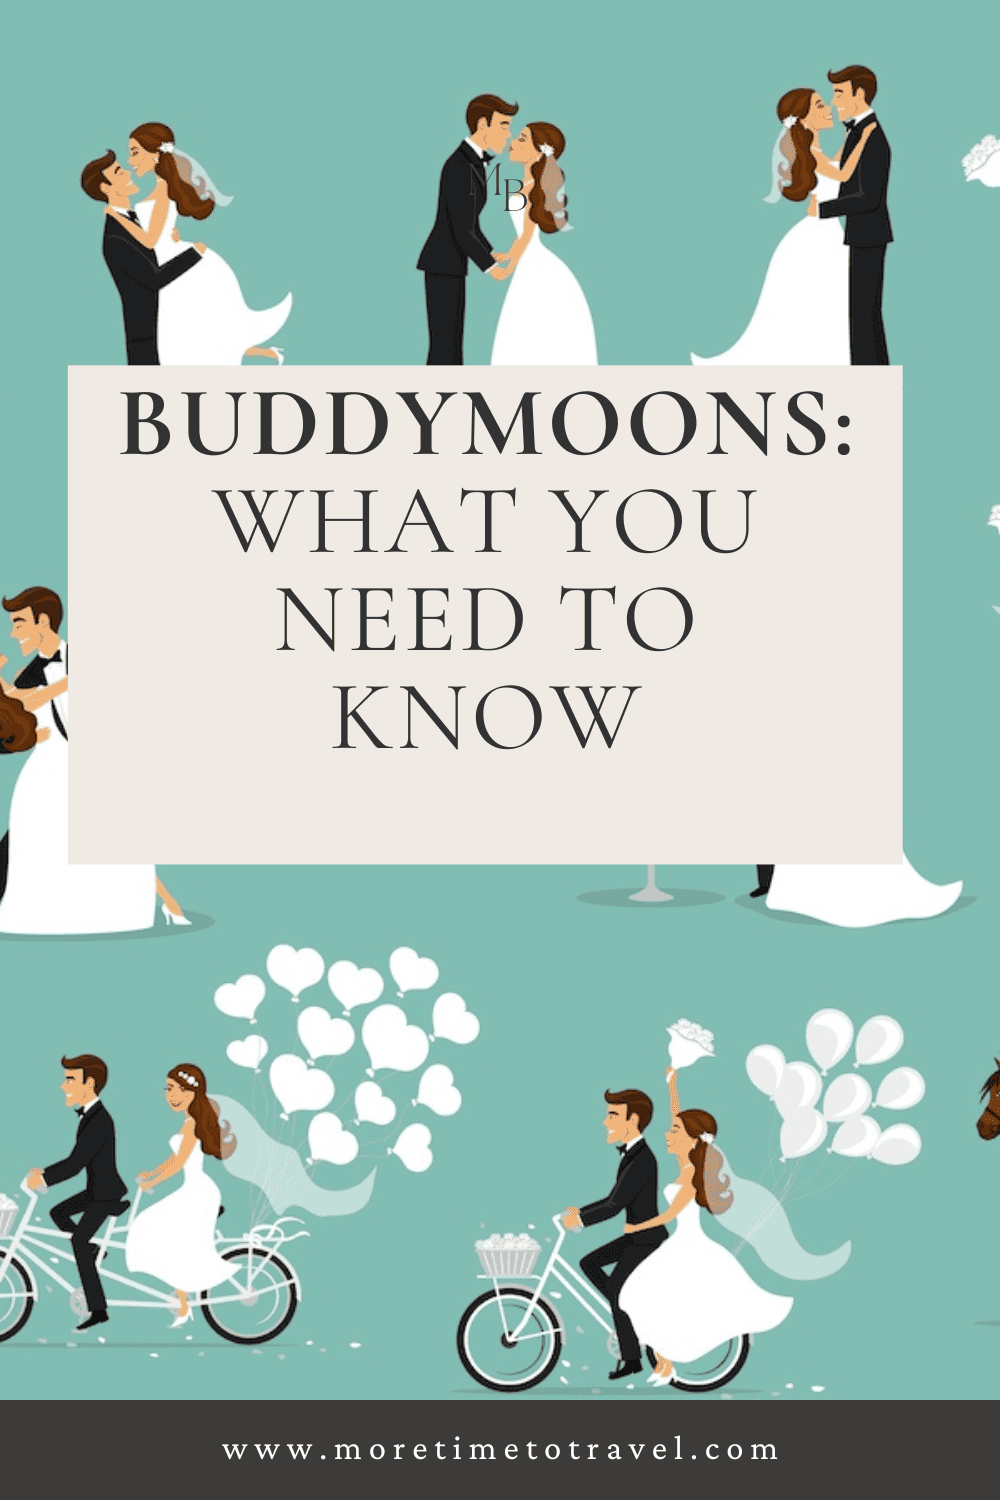 The Buddymoon: What You Need to Know pin